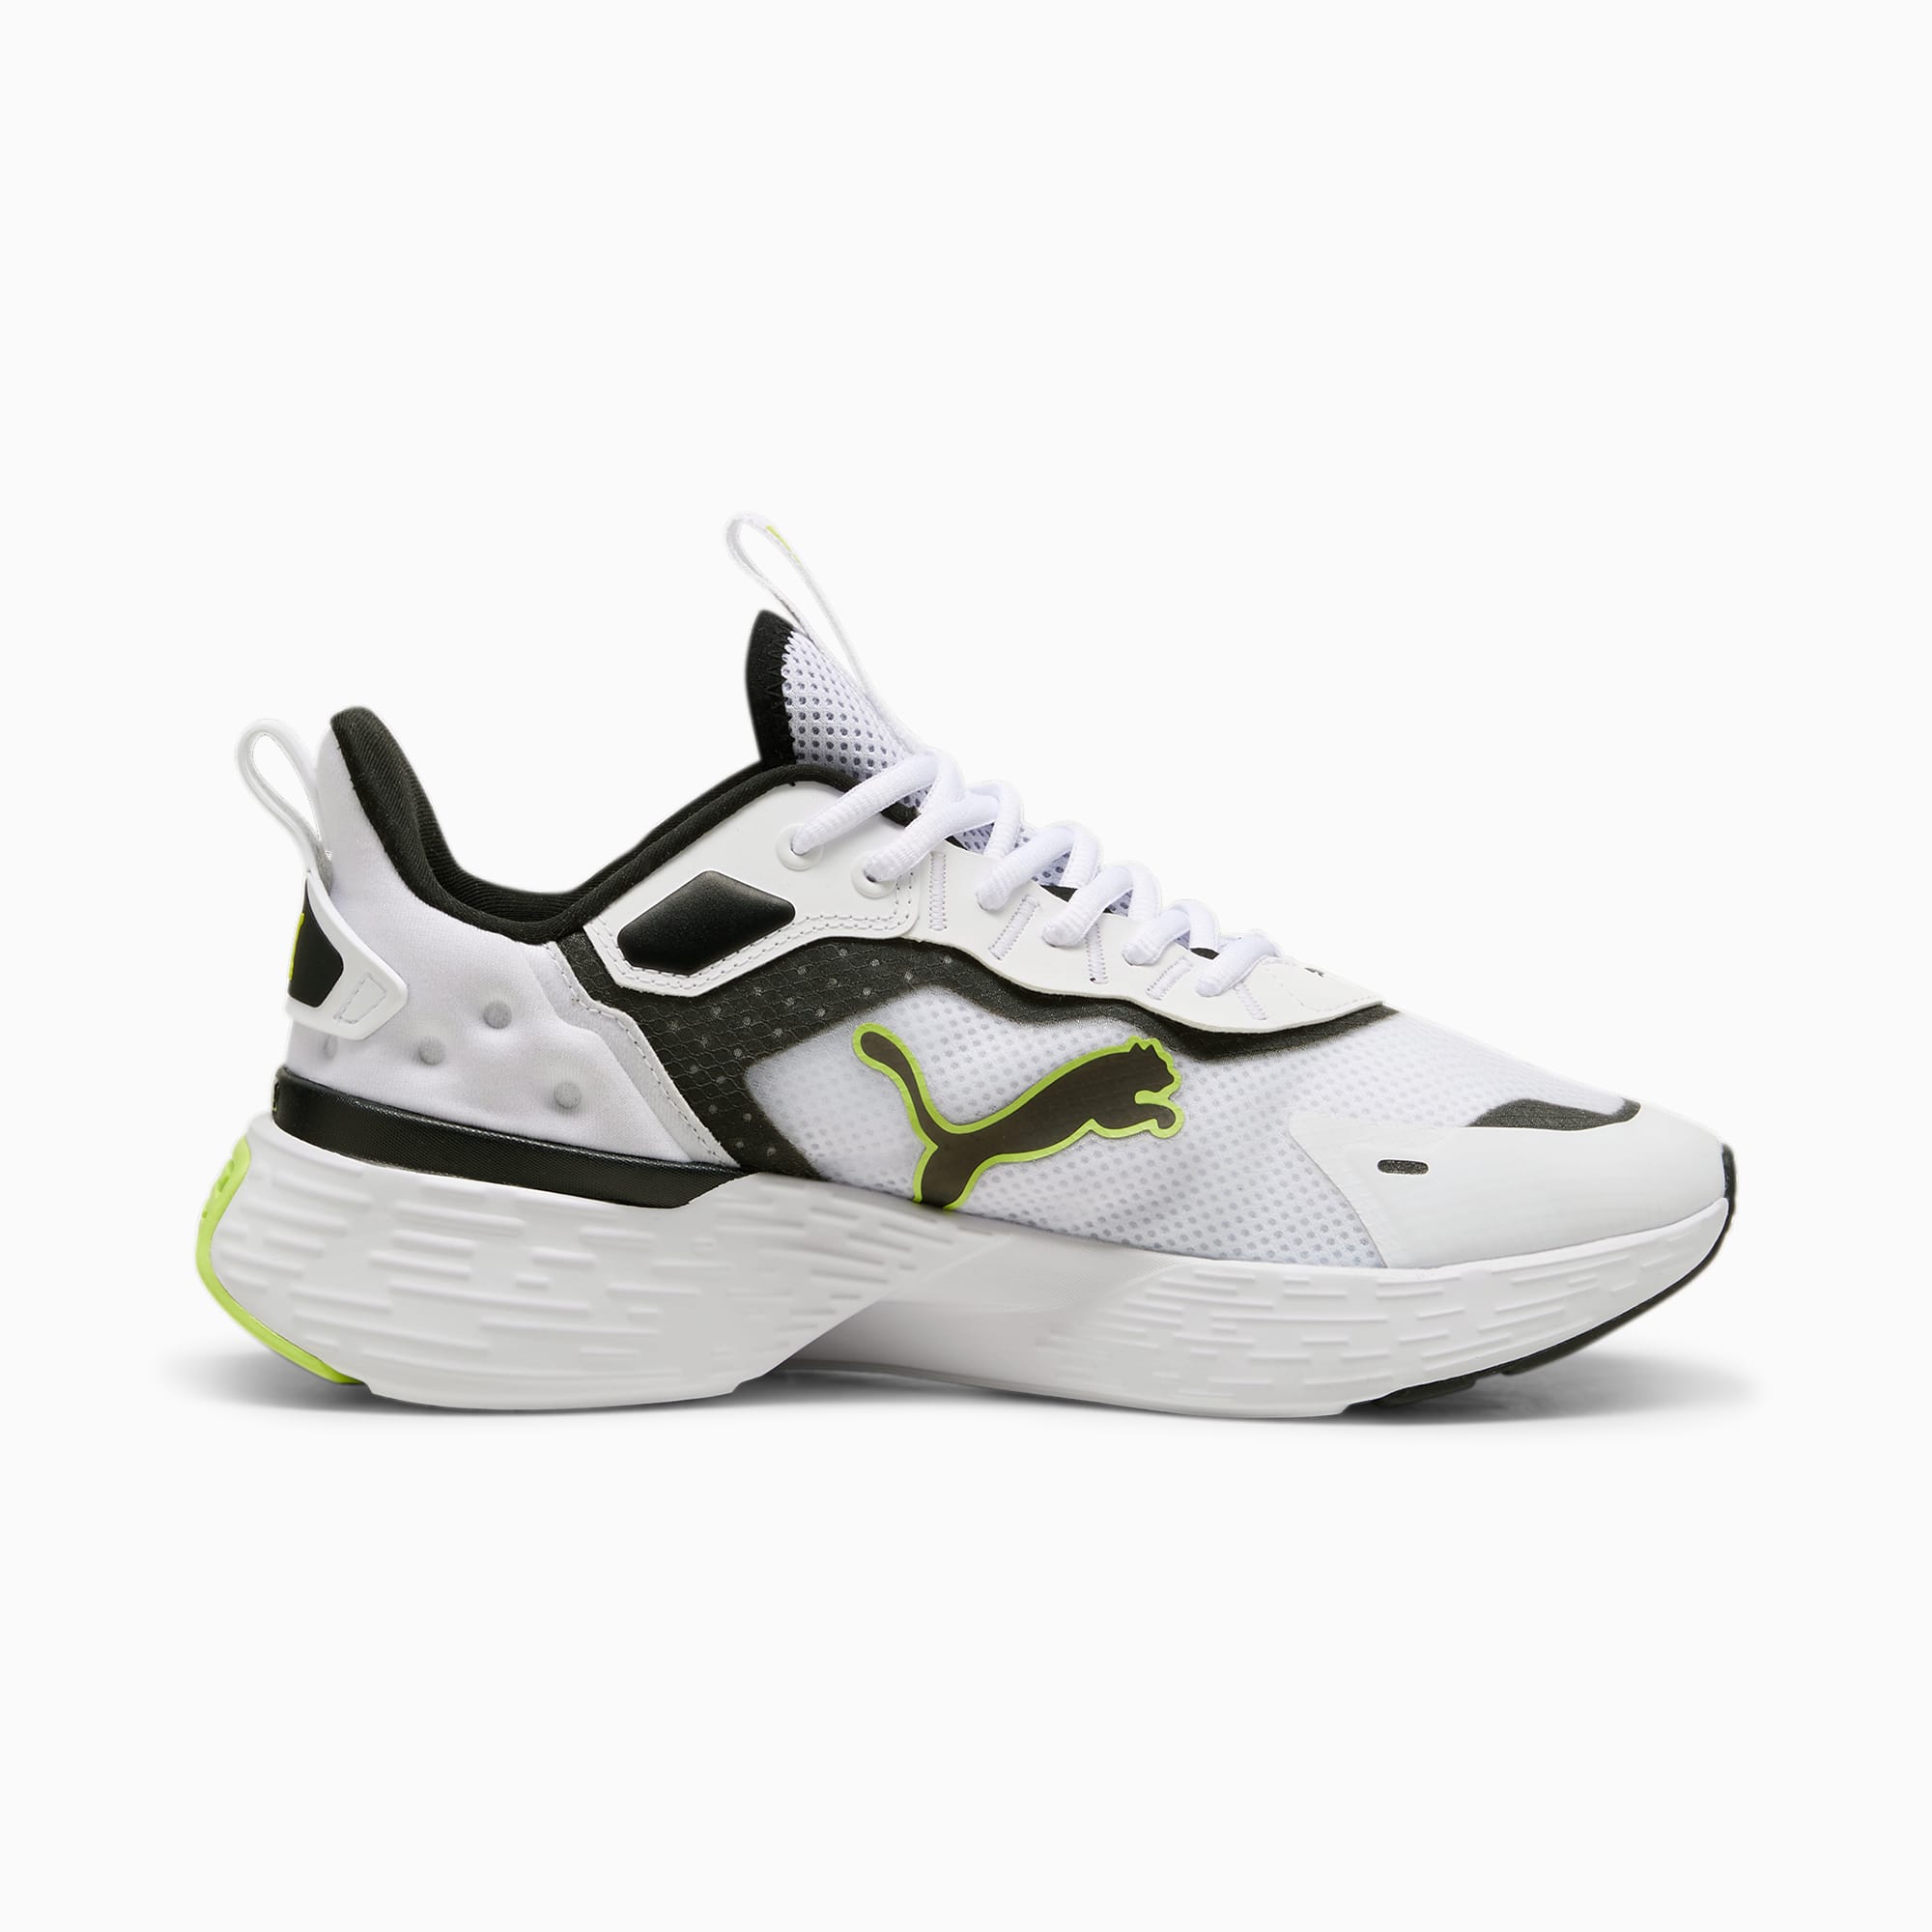 Women's PUMA Softride Sway Running Shoe, White/Black/Lime Pow, Size 35,5, Shoes